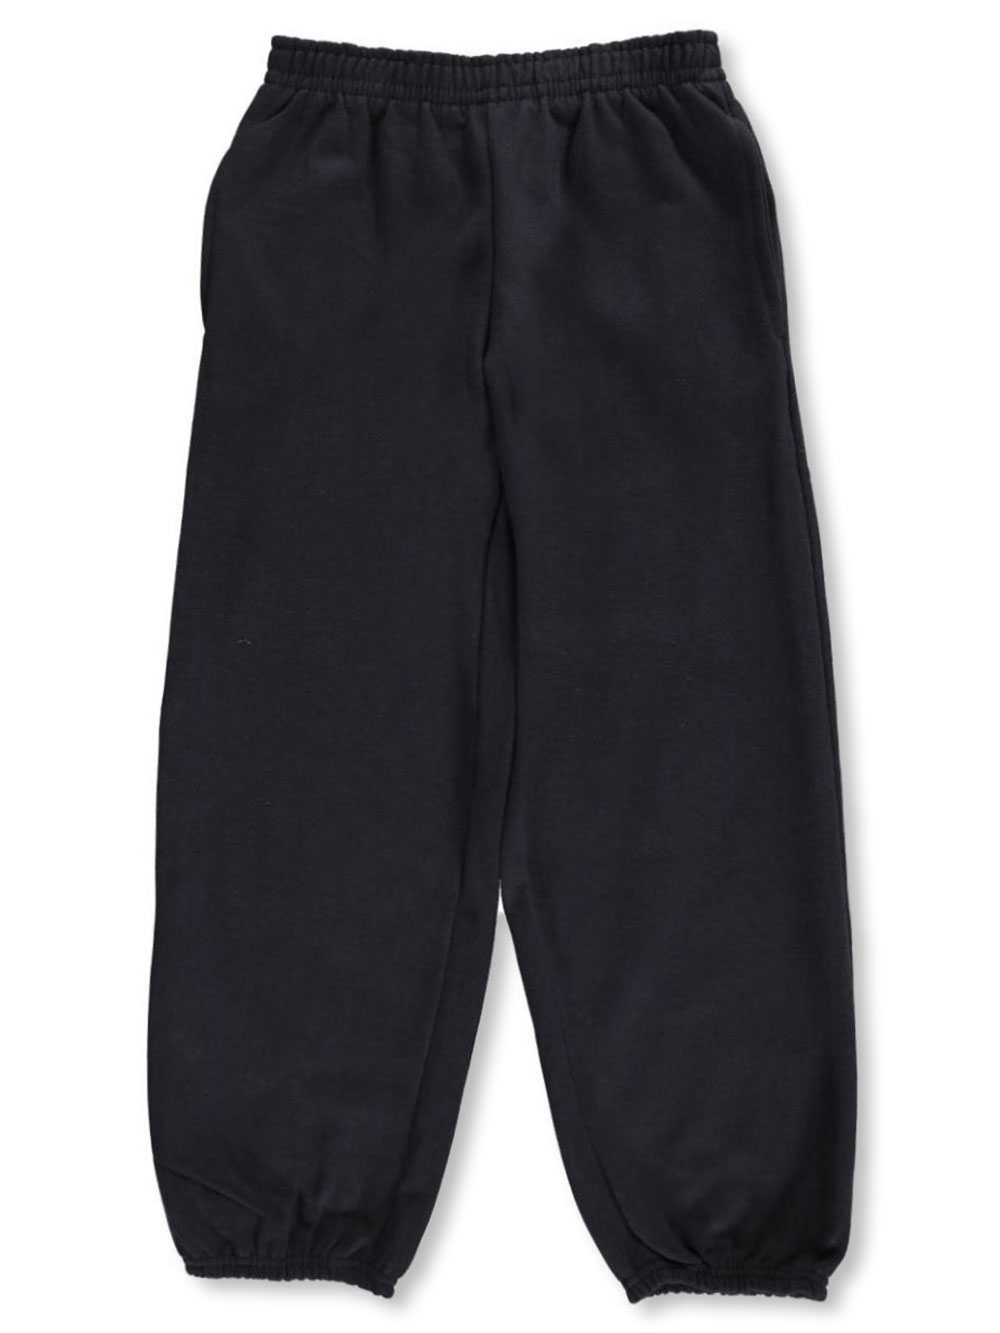 Size 8 Sweatpants for Boys